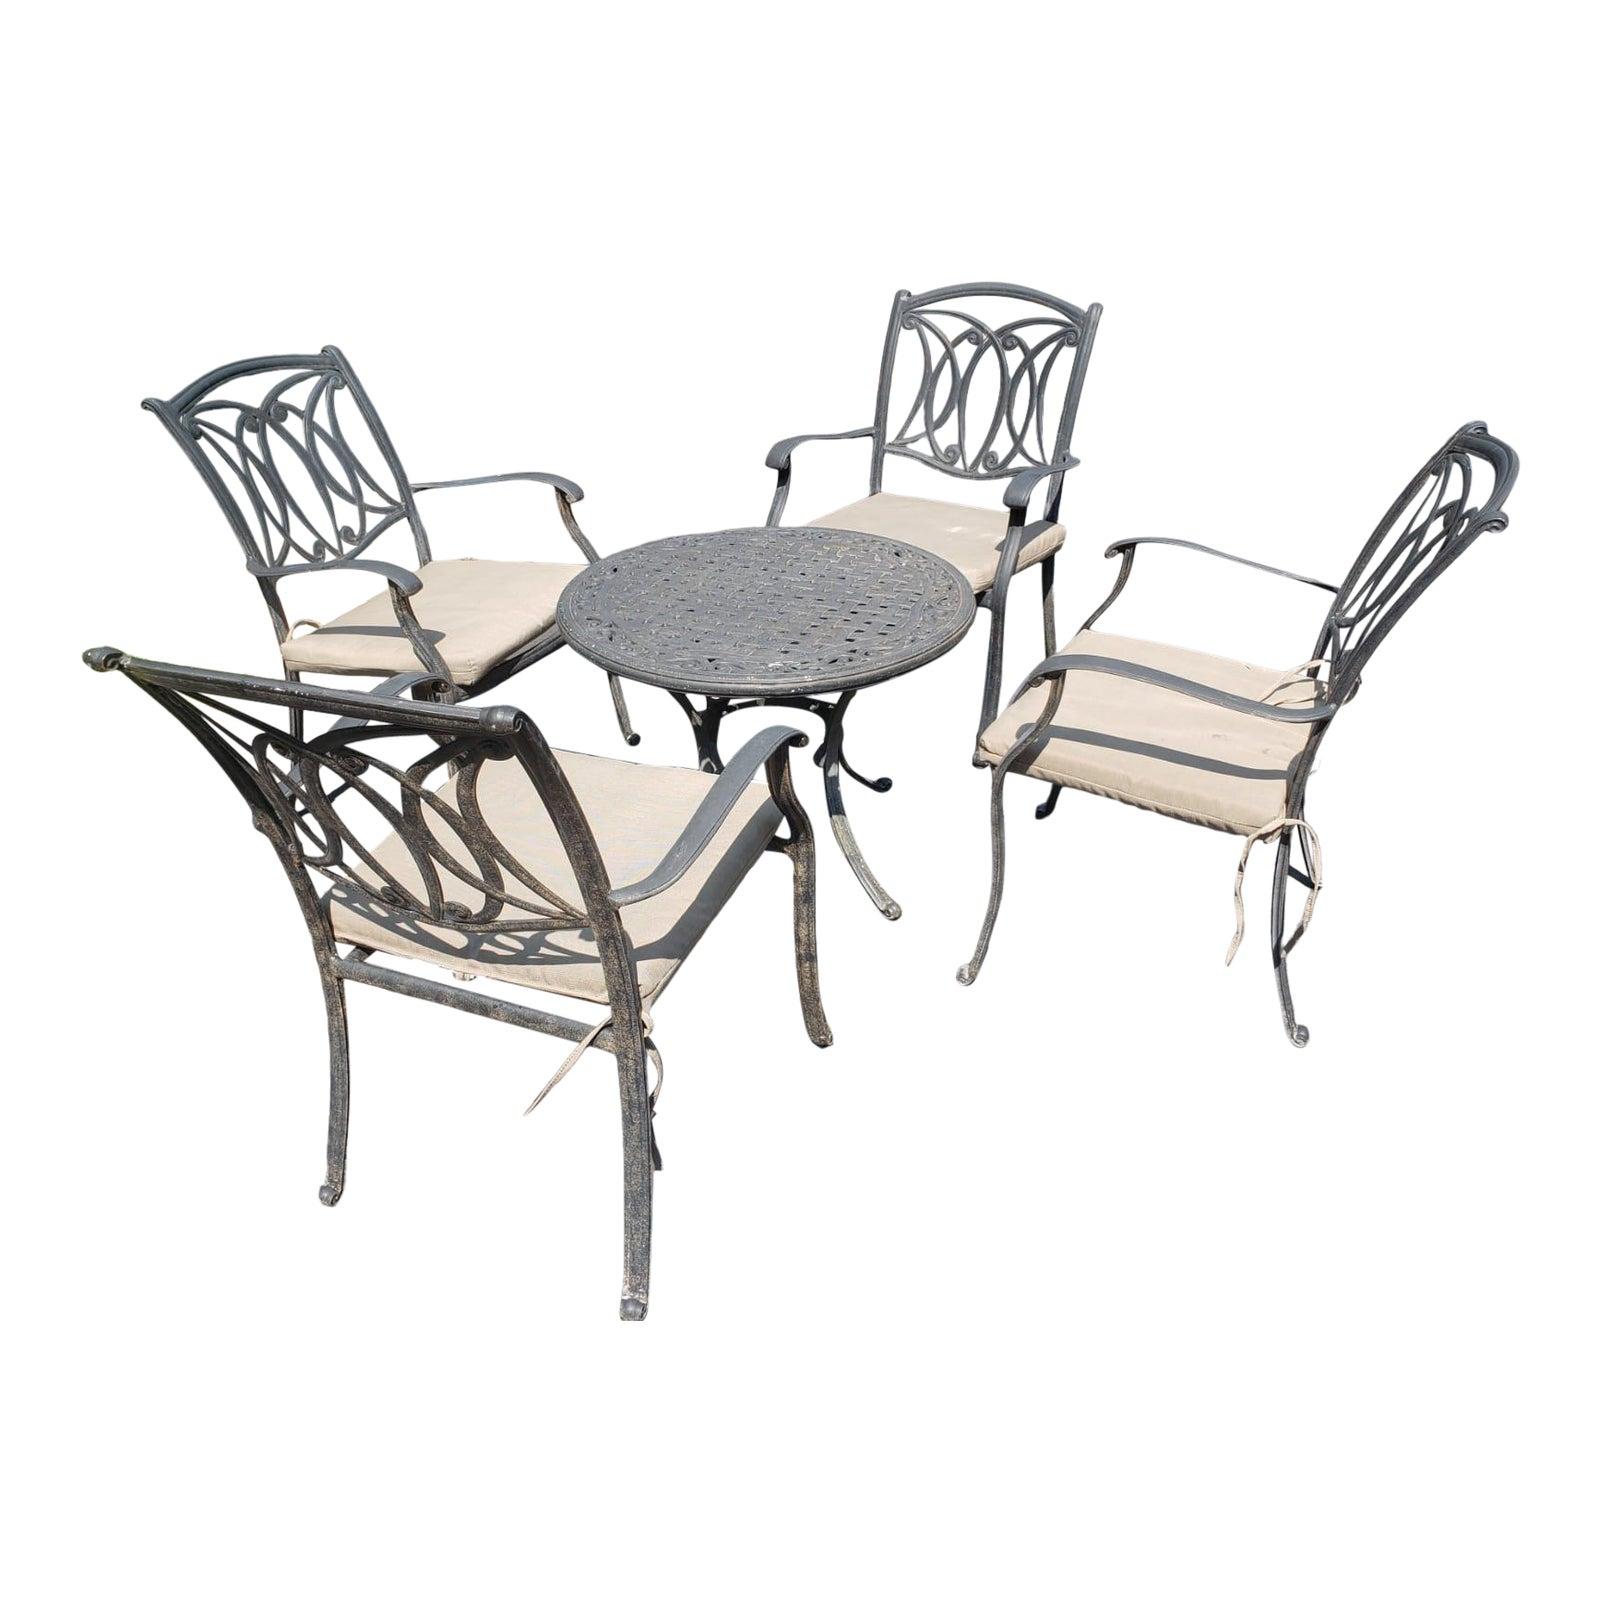 Vintage Cast Aluminum Patio Table & 4 Armchairs with Cushions For Sale